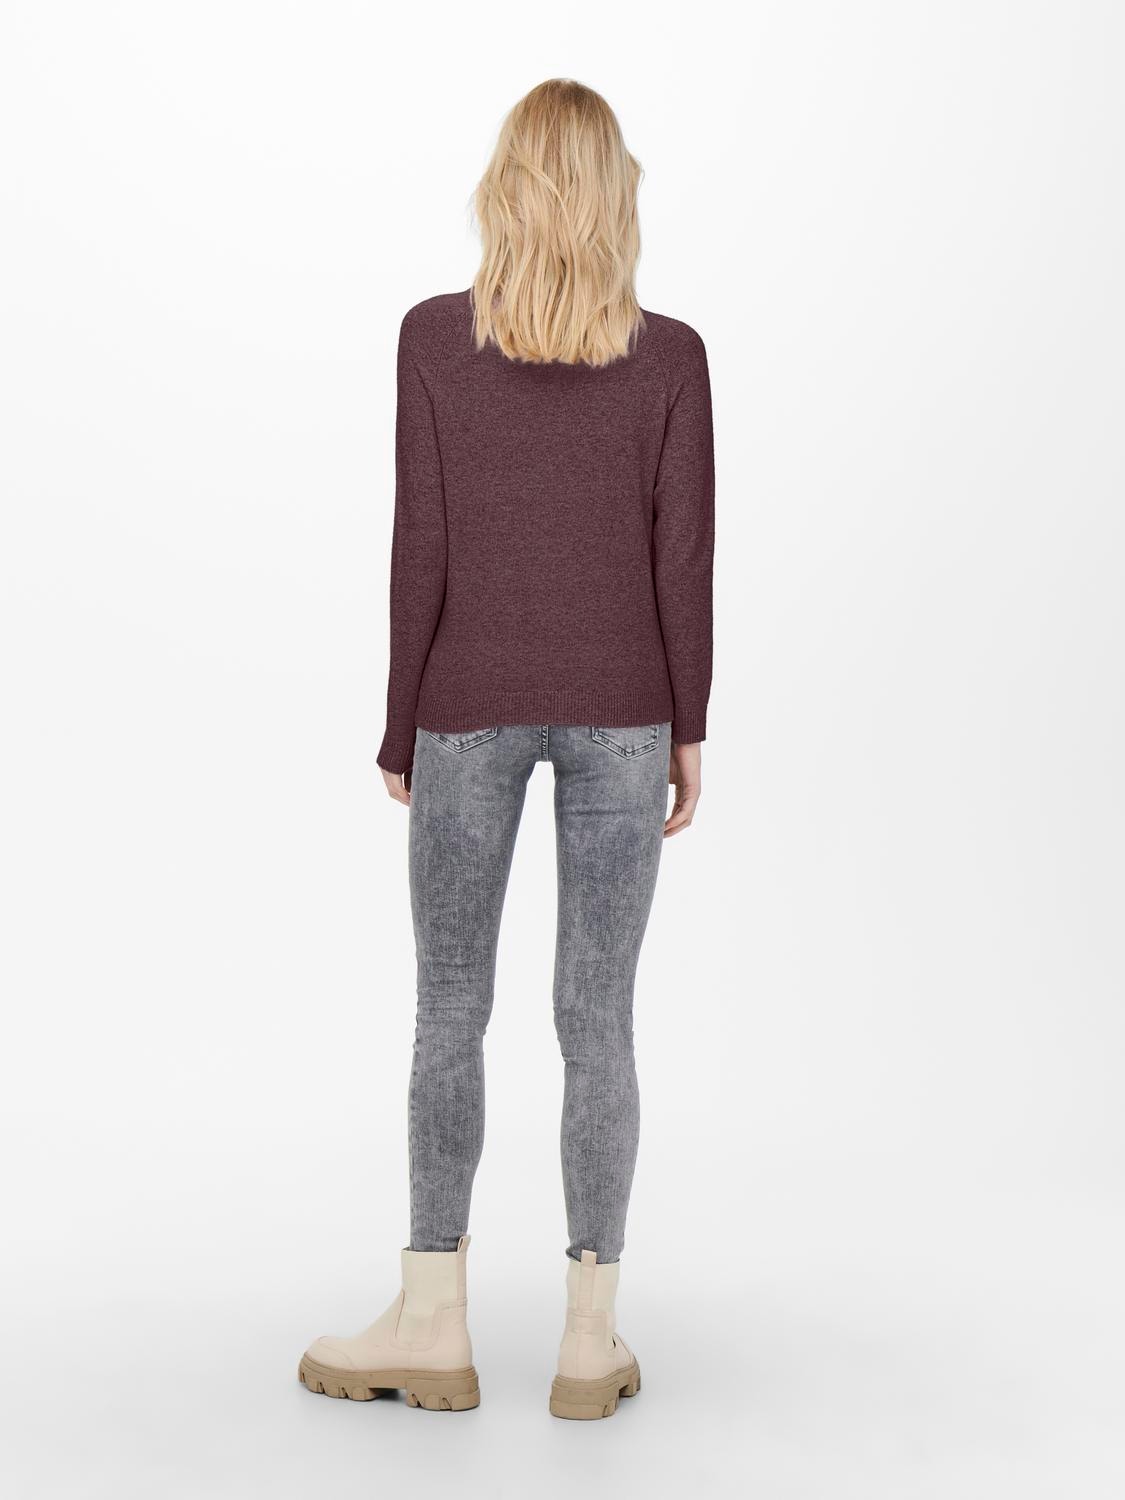 ONLY high neck knitted pullover -Rose Brown - 15204279